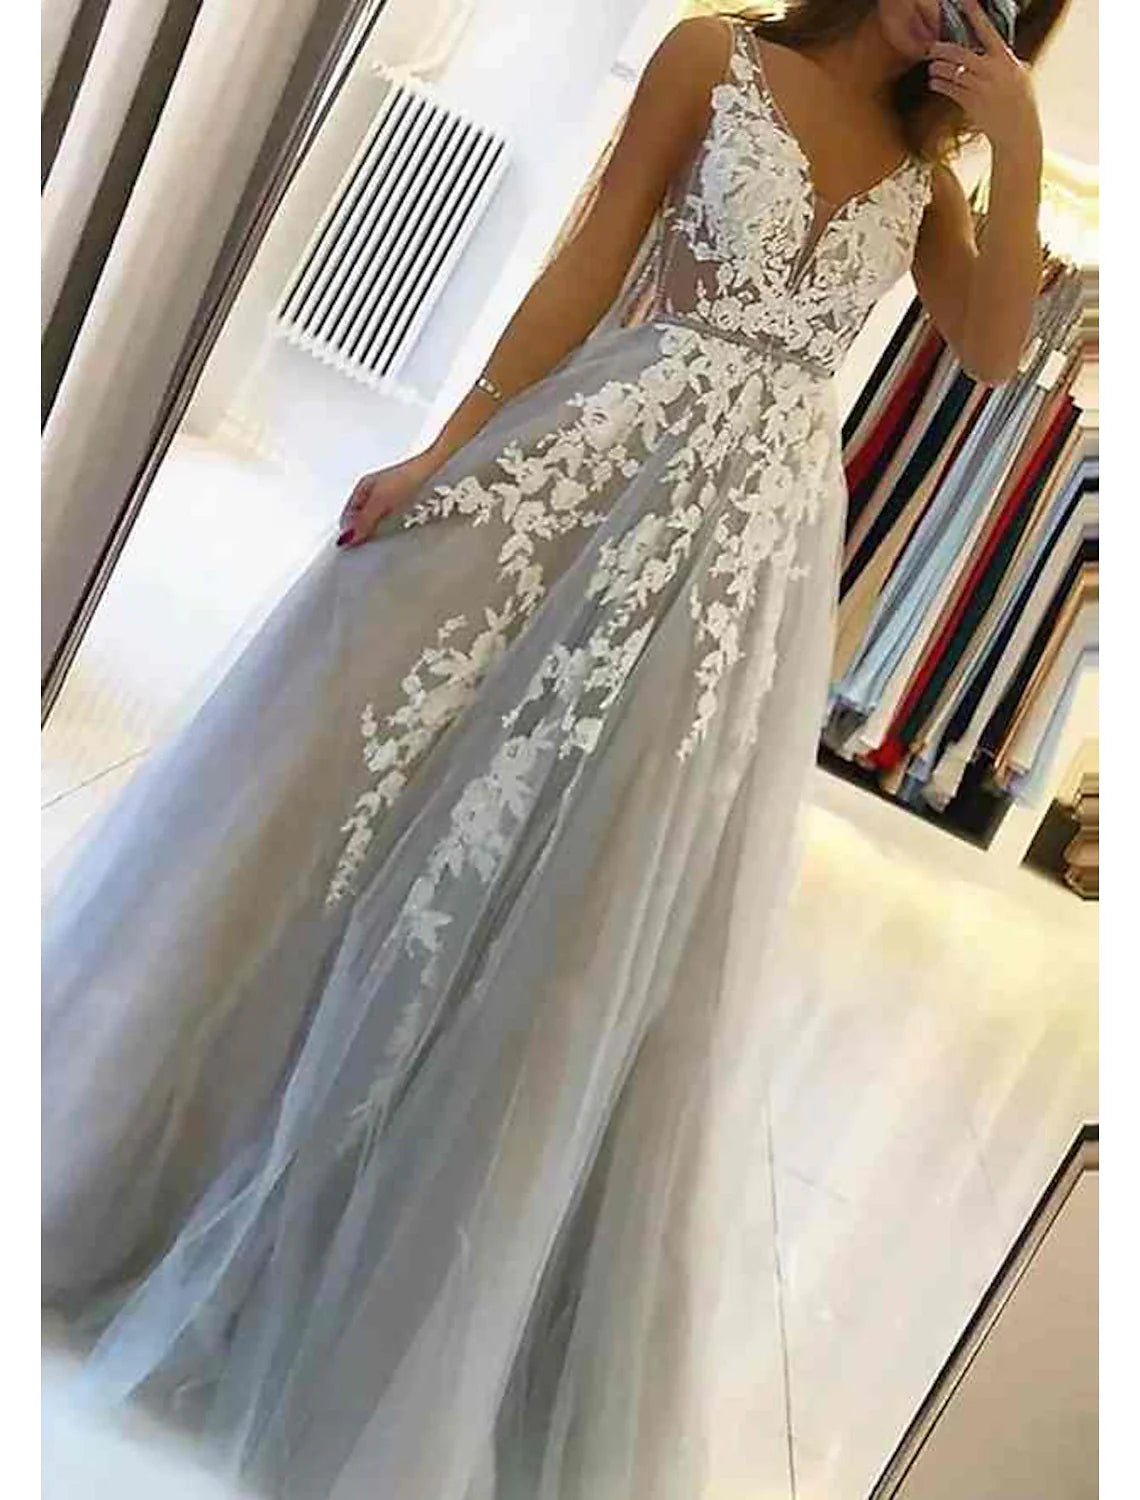 Ball Gown Evening Gown Floral Dress Prom Black Tie Court Train Sleeveless Off Shoulder Royal Style Cotton Backless with Beading Appliques